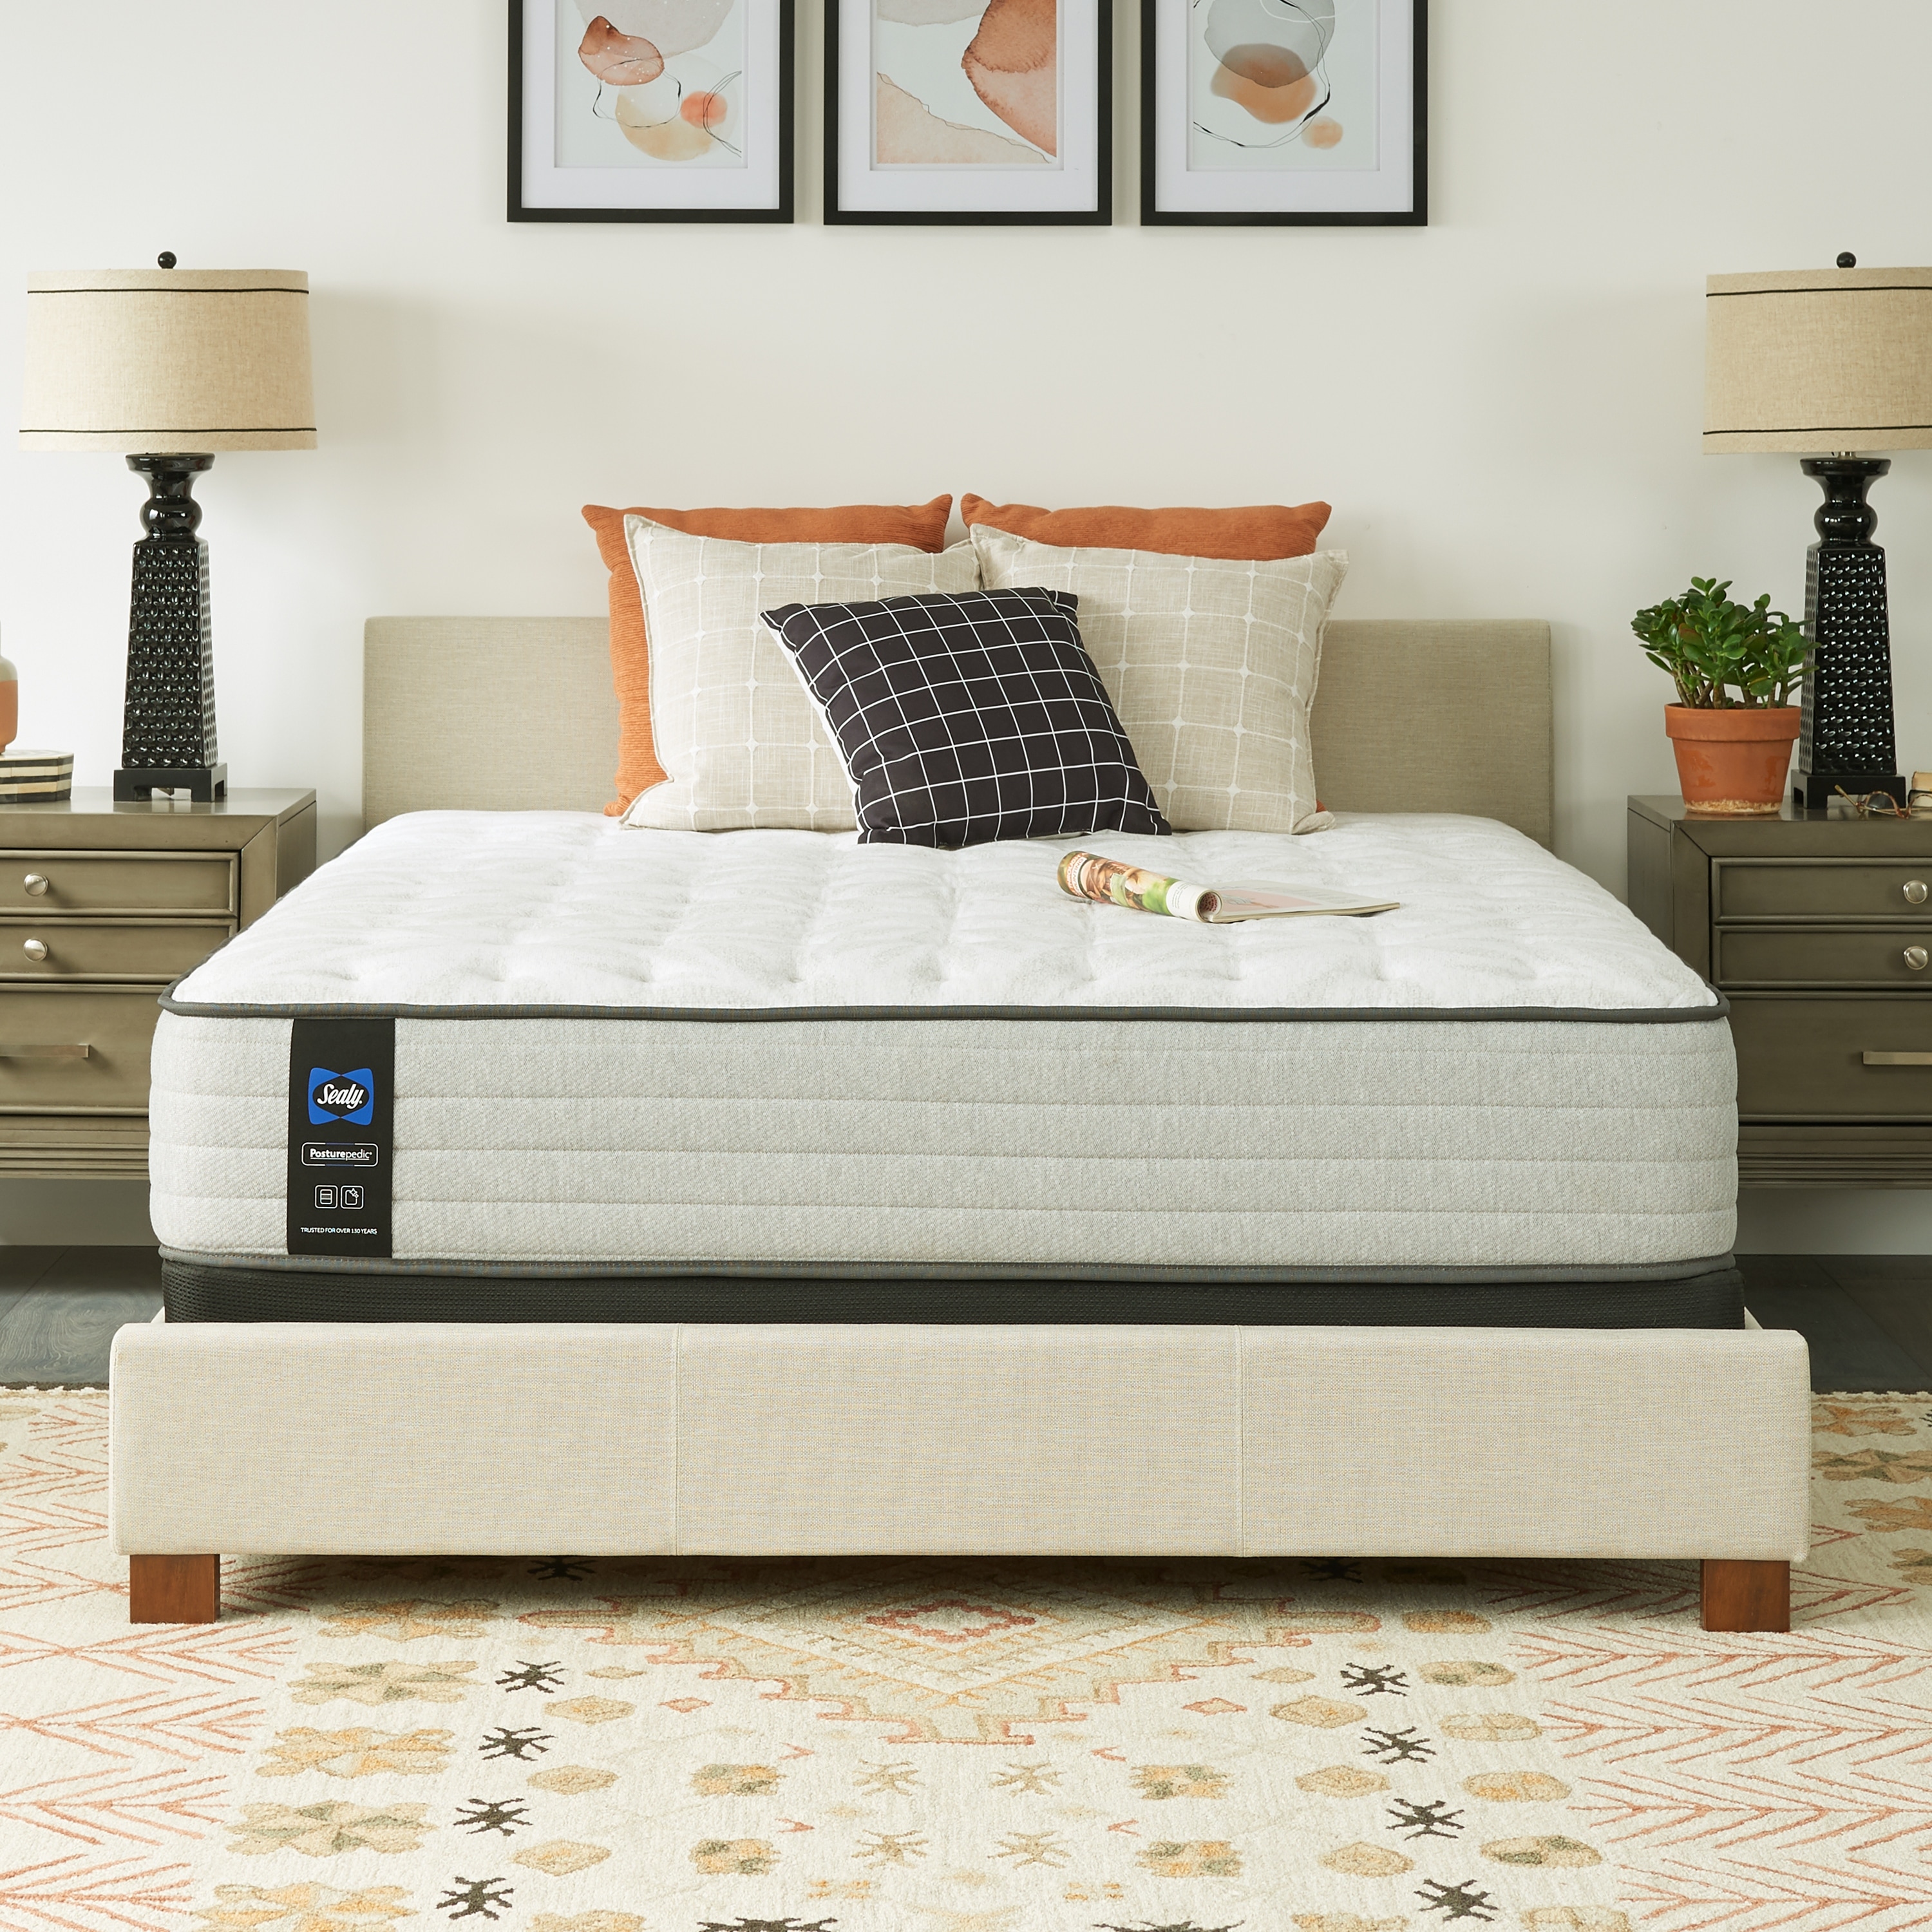 Queen Size Mattress & Boxspring Sets Sealy Mattress and Box Spring Sets ...